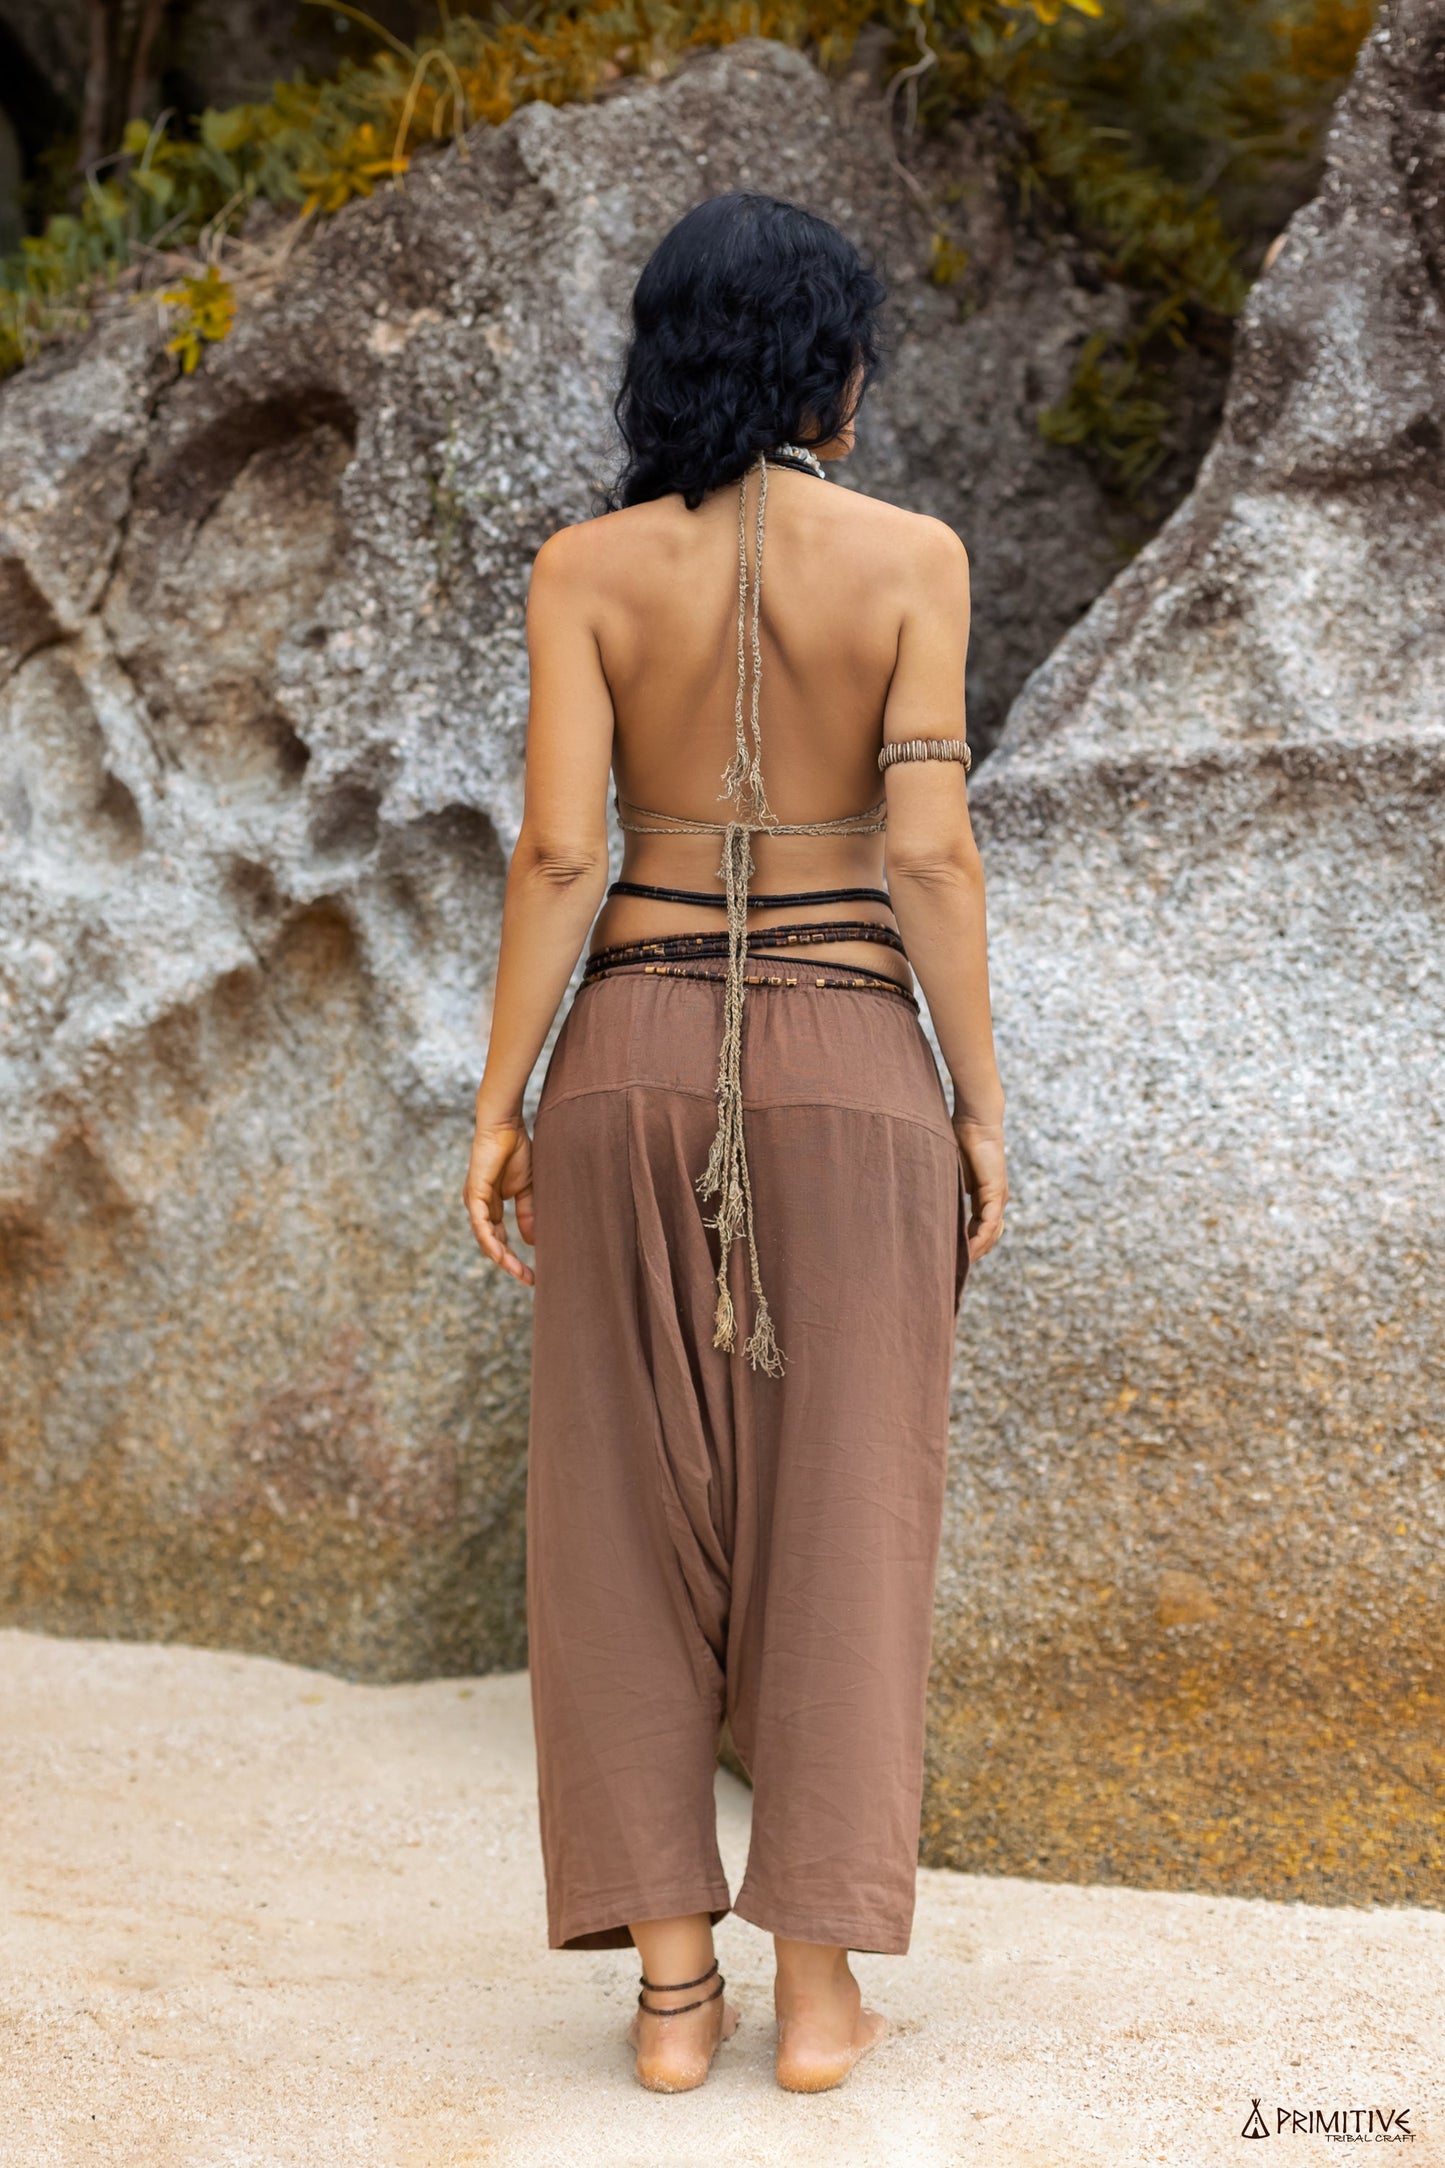 Nomad Spirit Outfit ⋙⋘ Knitted Beach Top + 3/4 Harem Pants